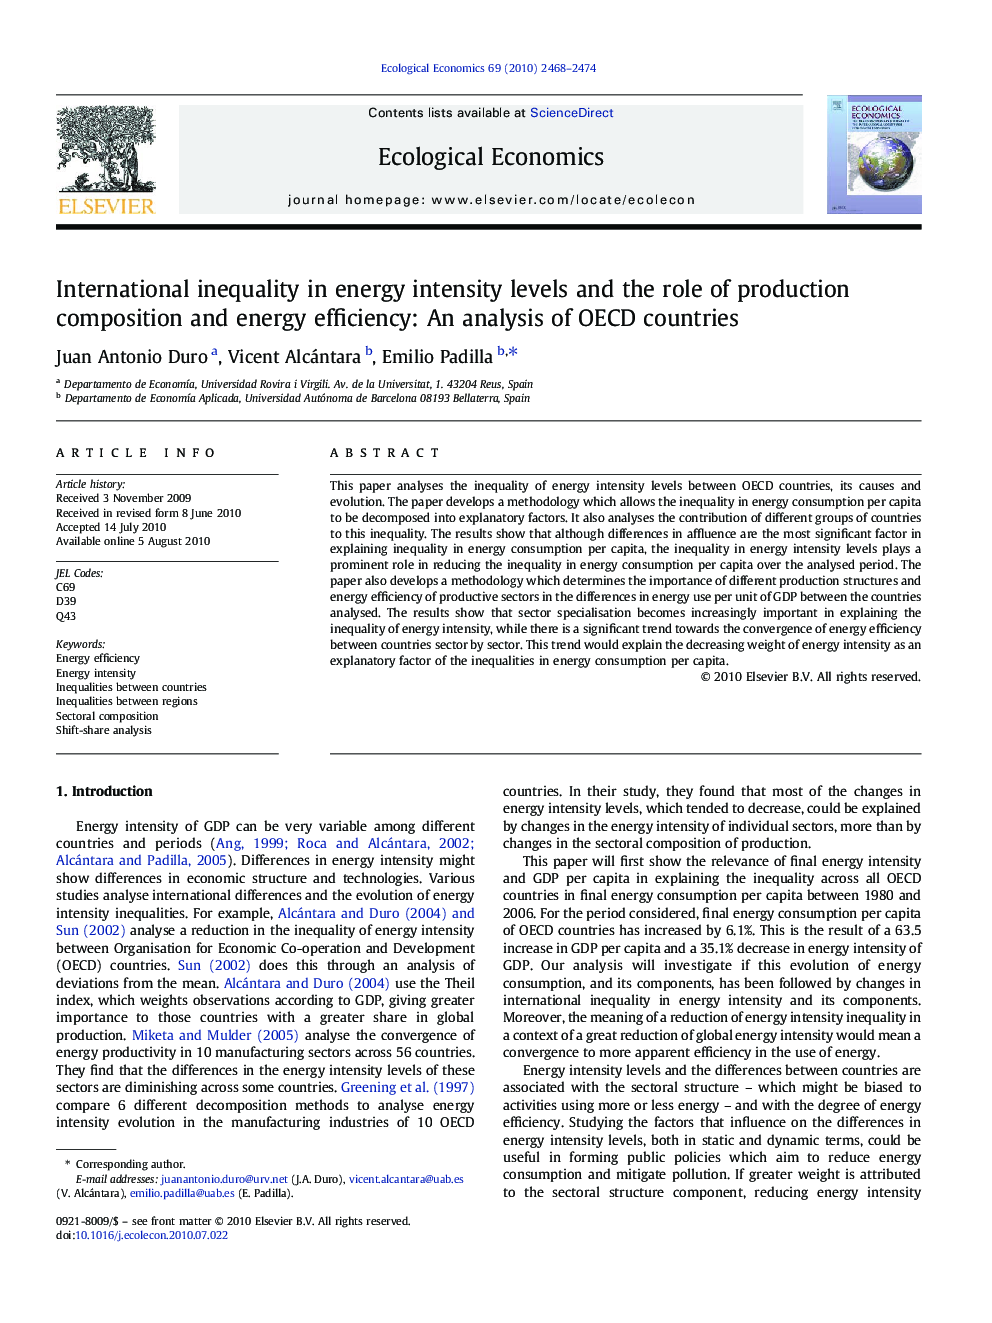 International inequality in energy intensity levels and the role of production composition and energy efficiency: An analysis of OECD countries